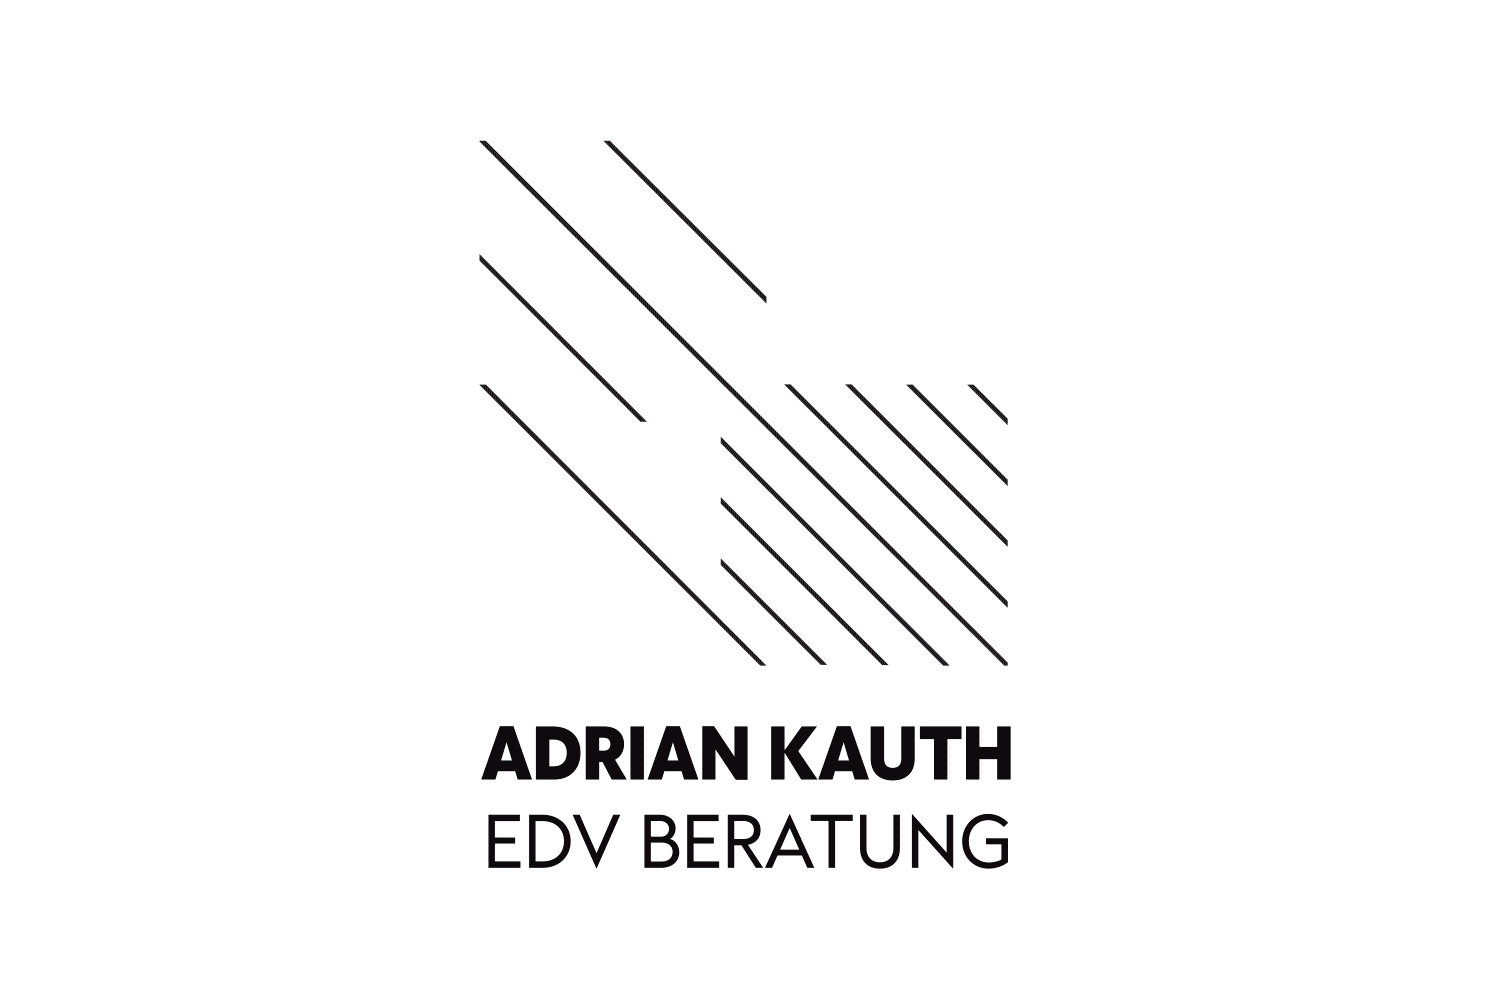 Design of the visual appearance for Kauth EDP Consulting. The logo, as a composition of crossbars in different frequencies, represents the electronic collection and processing of data. The corporate identity describes processes and the transport of information via sensors, processors, algorithms, displays, actuators and electrical signals - simply complex.